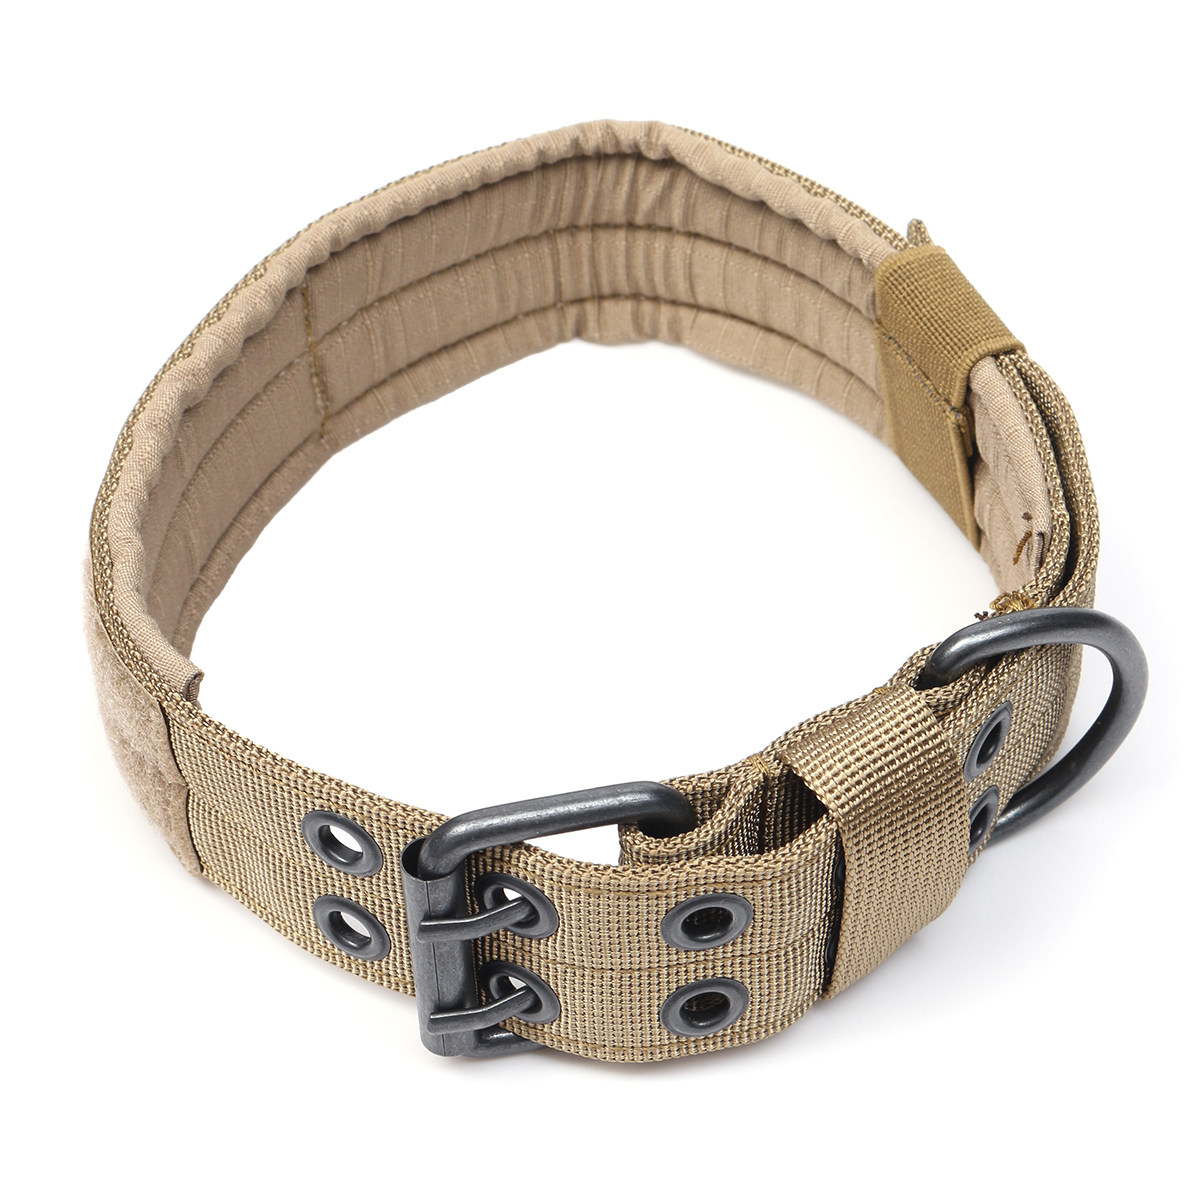 Adjustable-Training-Dog-Collar-Nylon-Tactical-Dog-Collar-Military-With-Metal-D-Ring-Buckle-1366535-4